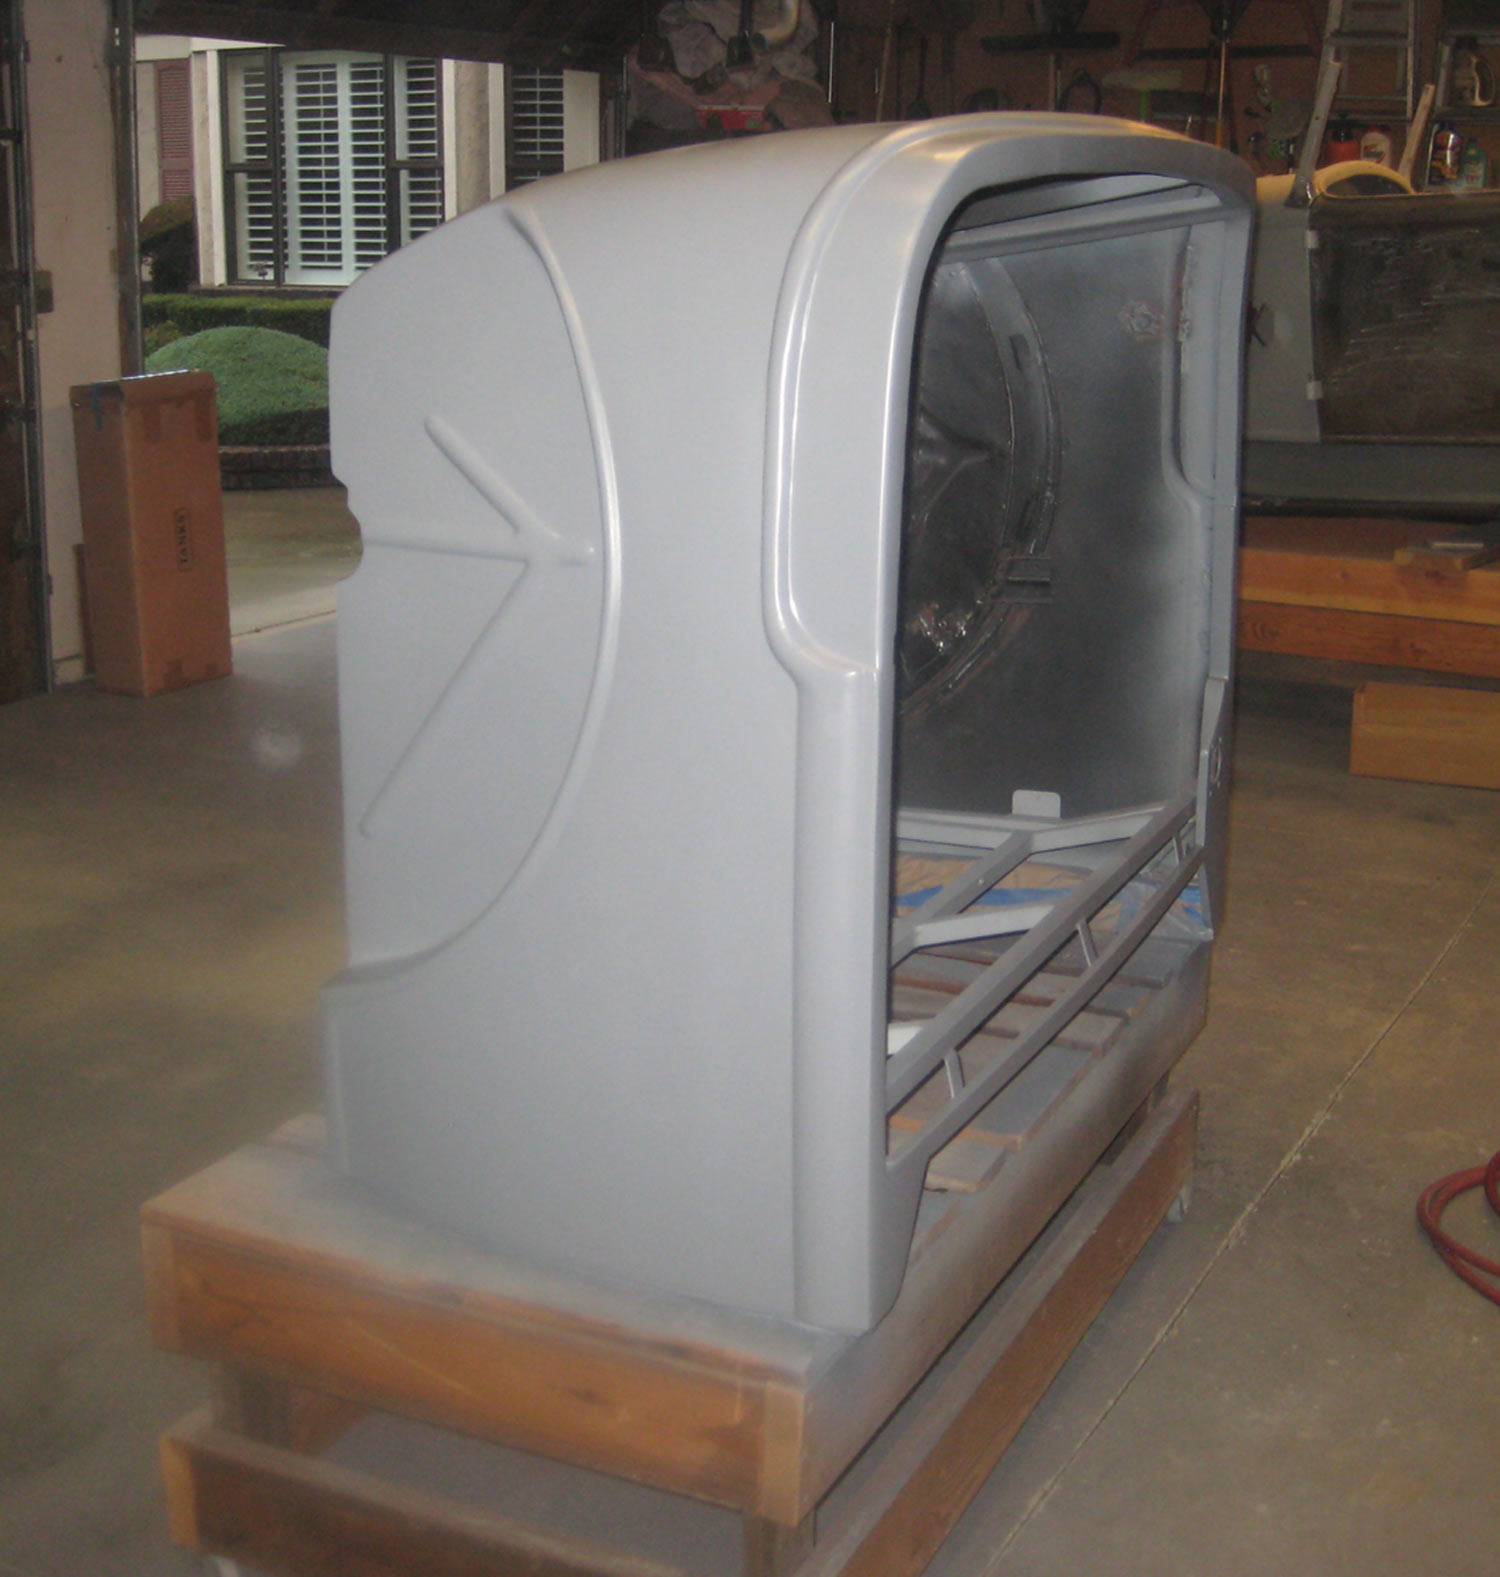 the rear body section sits on its face, covered in final primer